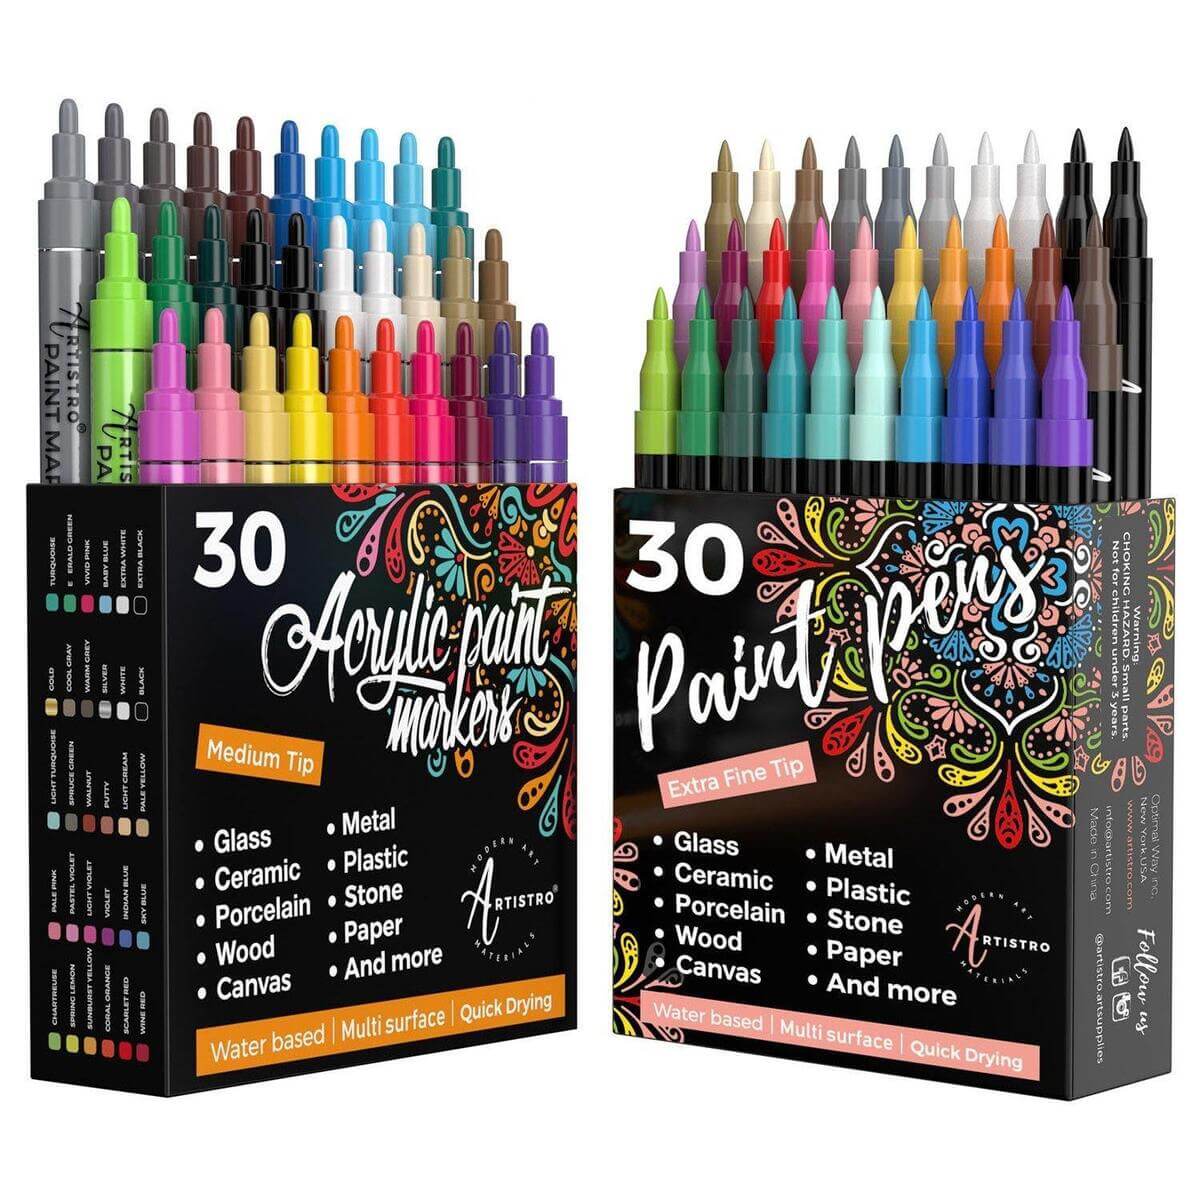 Colorful Art Co. Acrylic Paint Pens – Permanent, Waterproof Pen 12 Pack  w/Reversible 3-5mm Brush Tips – Painting Markers for Rocks, Wood, Glass